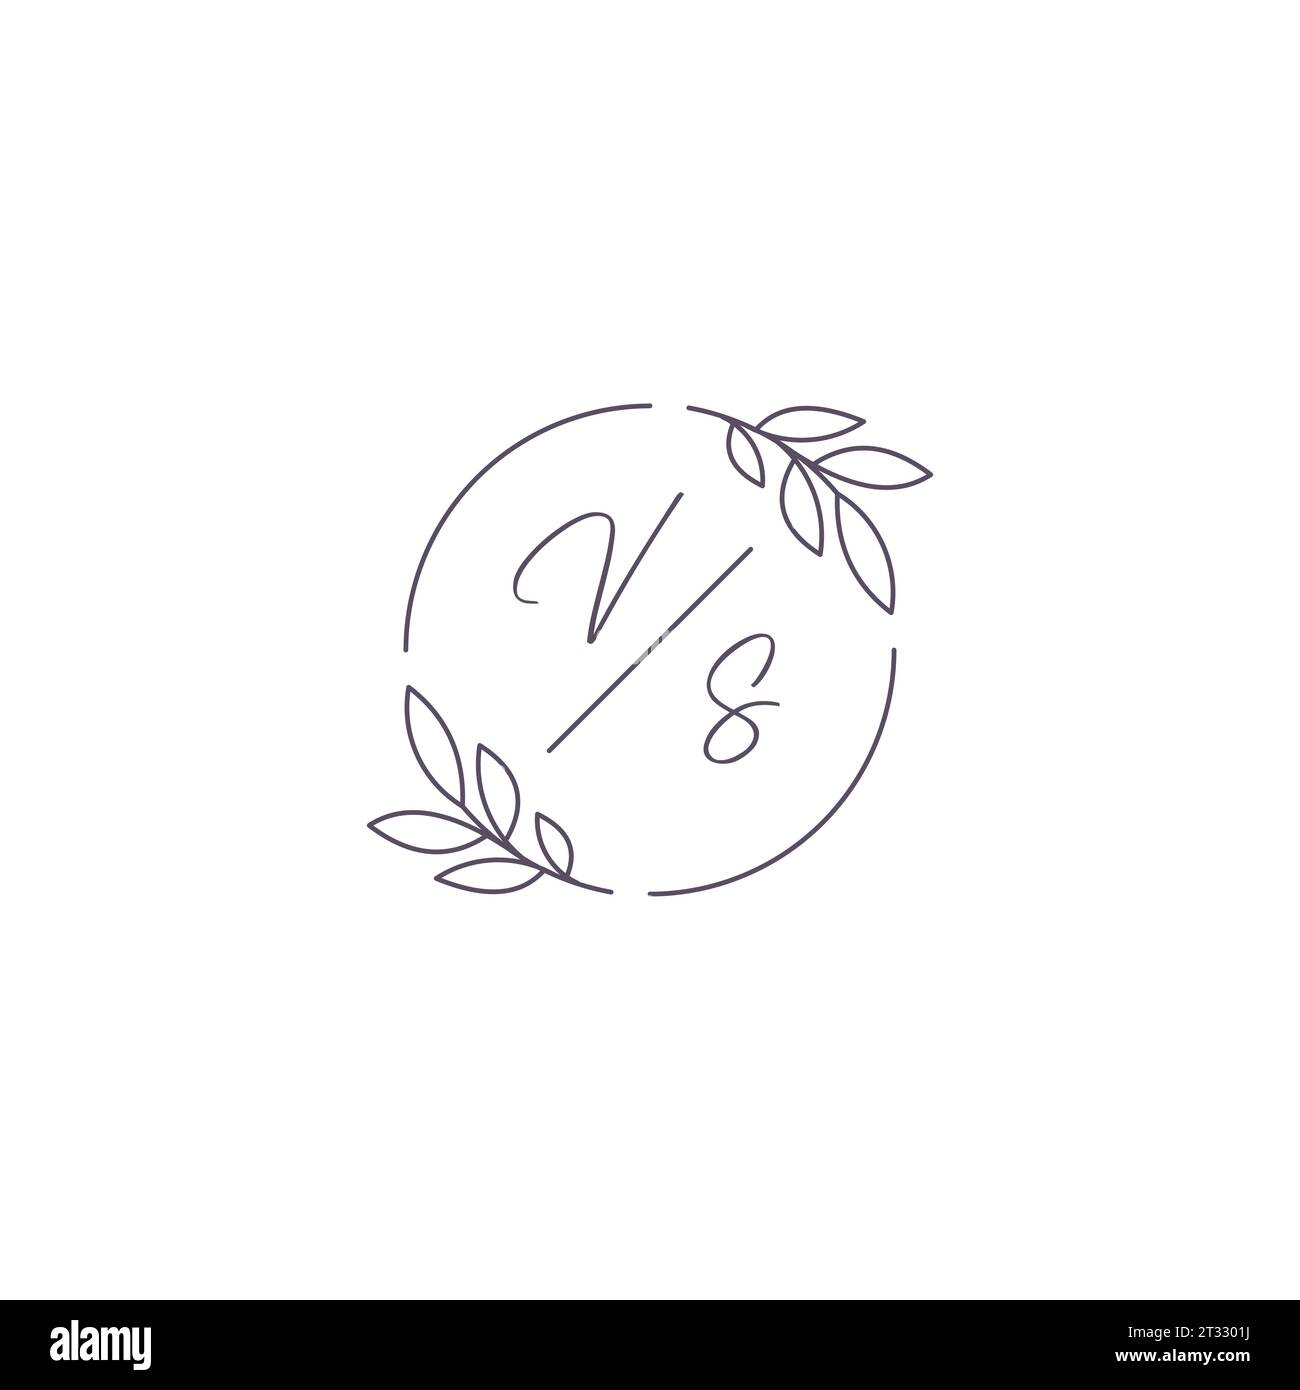 Initials VS monogram wedding logo with simple leaf outline and circle style vector graphic Stock Vector